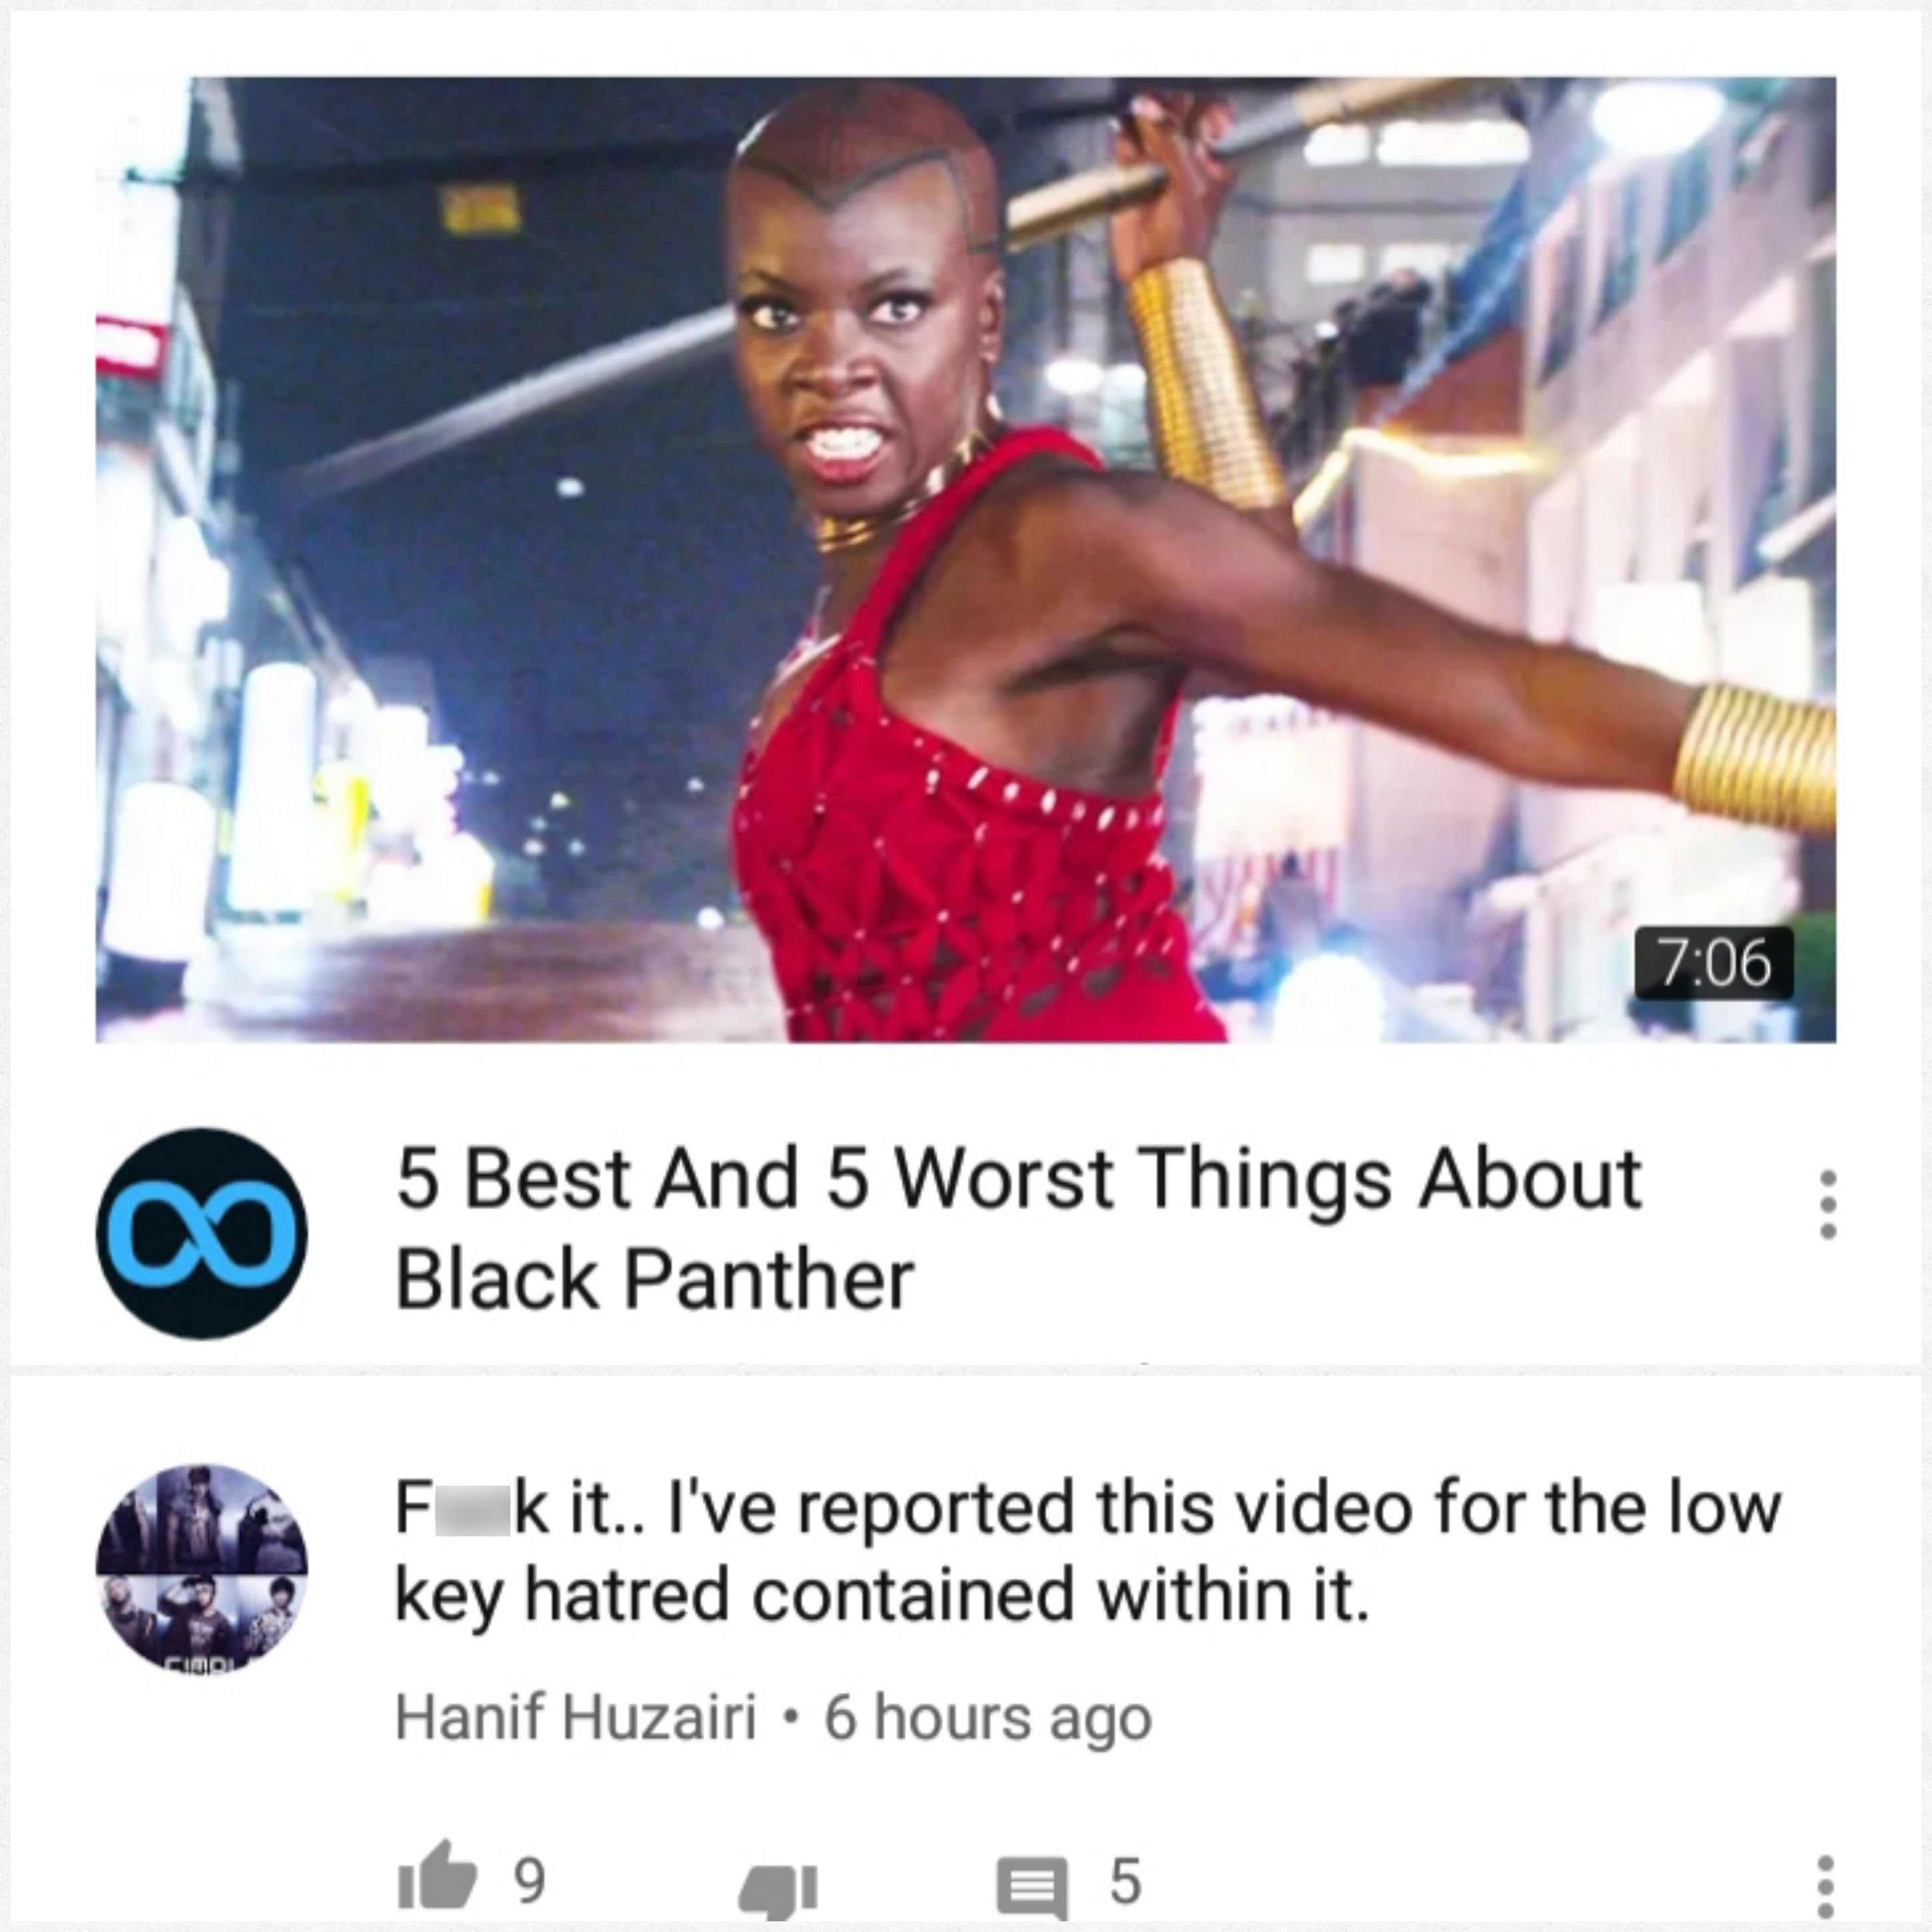 muscle - 5 Best And 5 Worst Things About Black Panther F k it. I've reported this video for the low key hatred contained within it. Hanif Huzairi. 6 hours ago 9 415